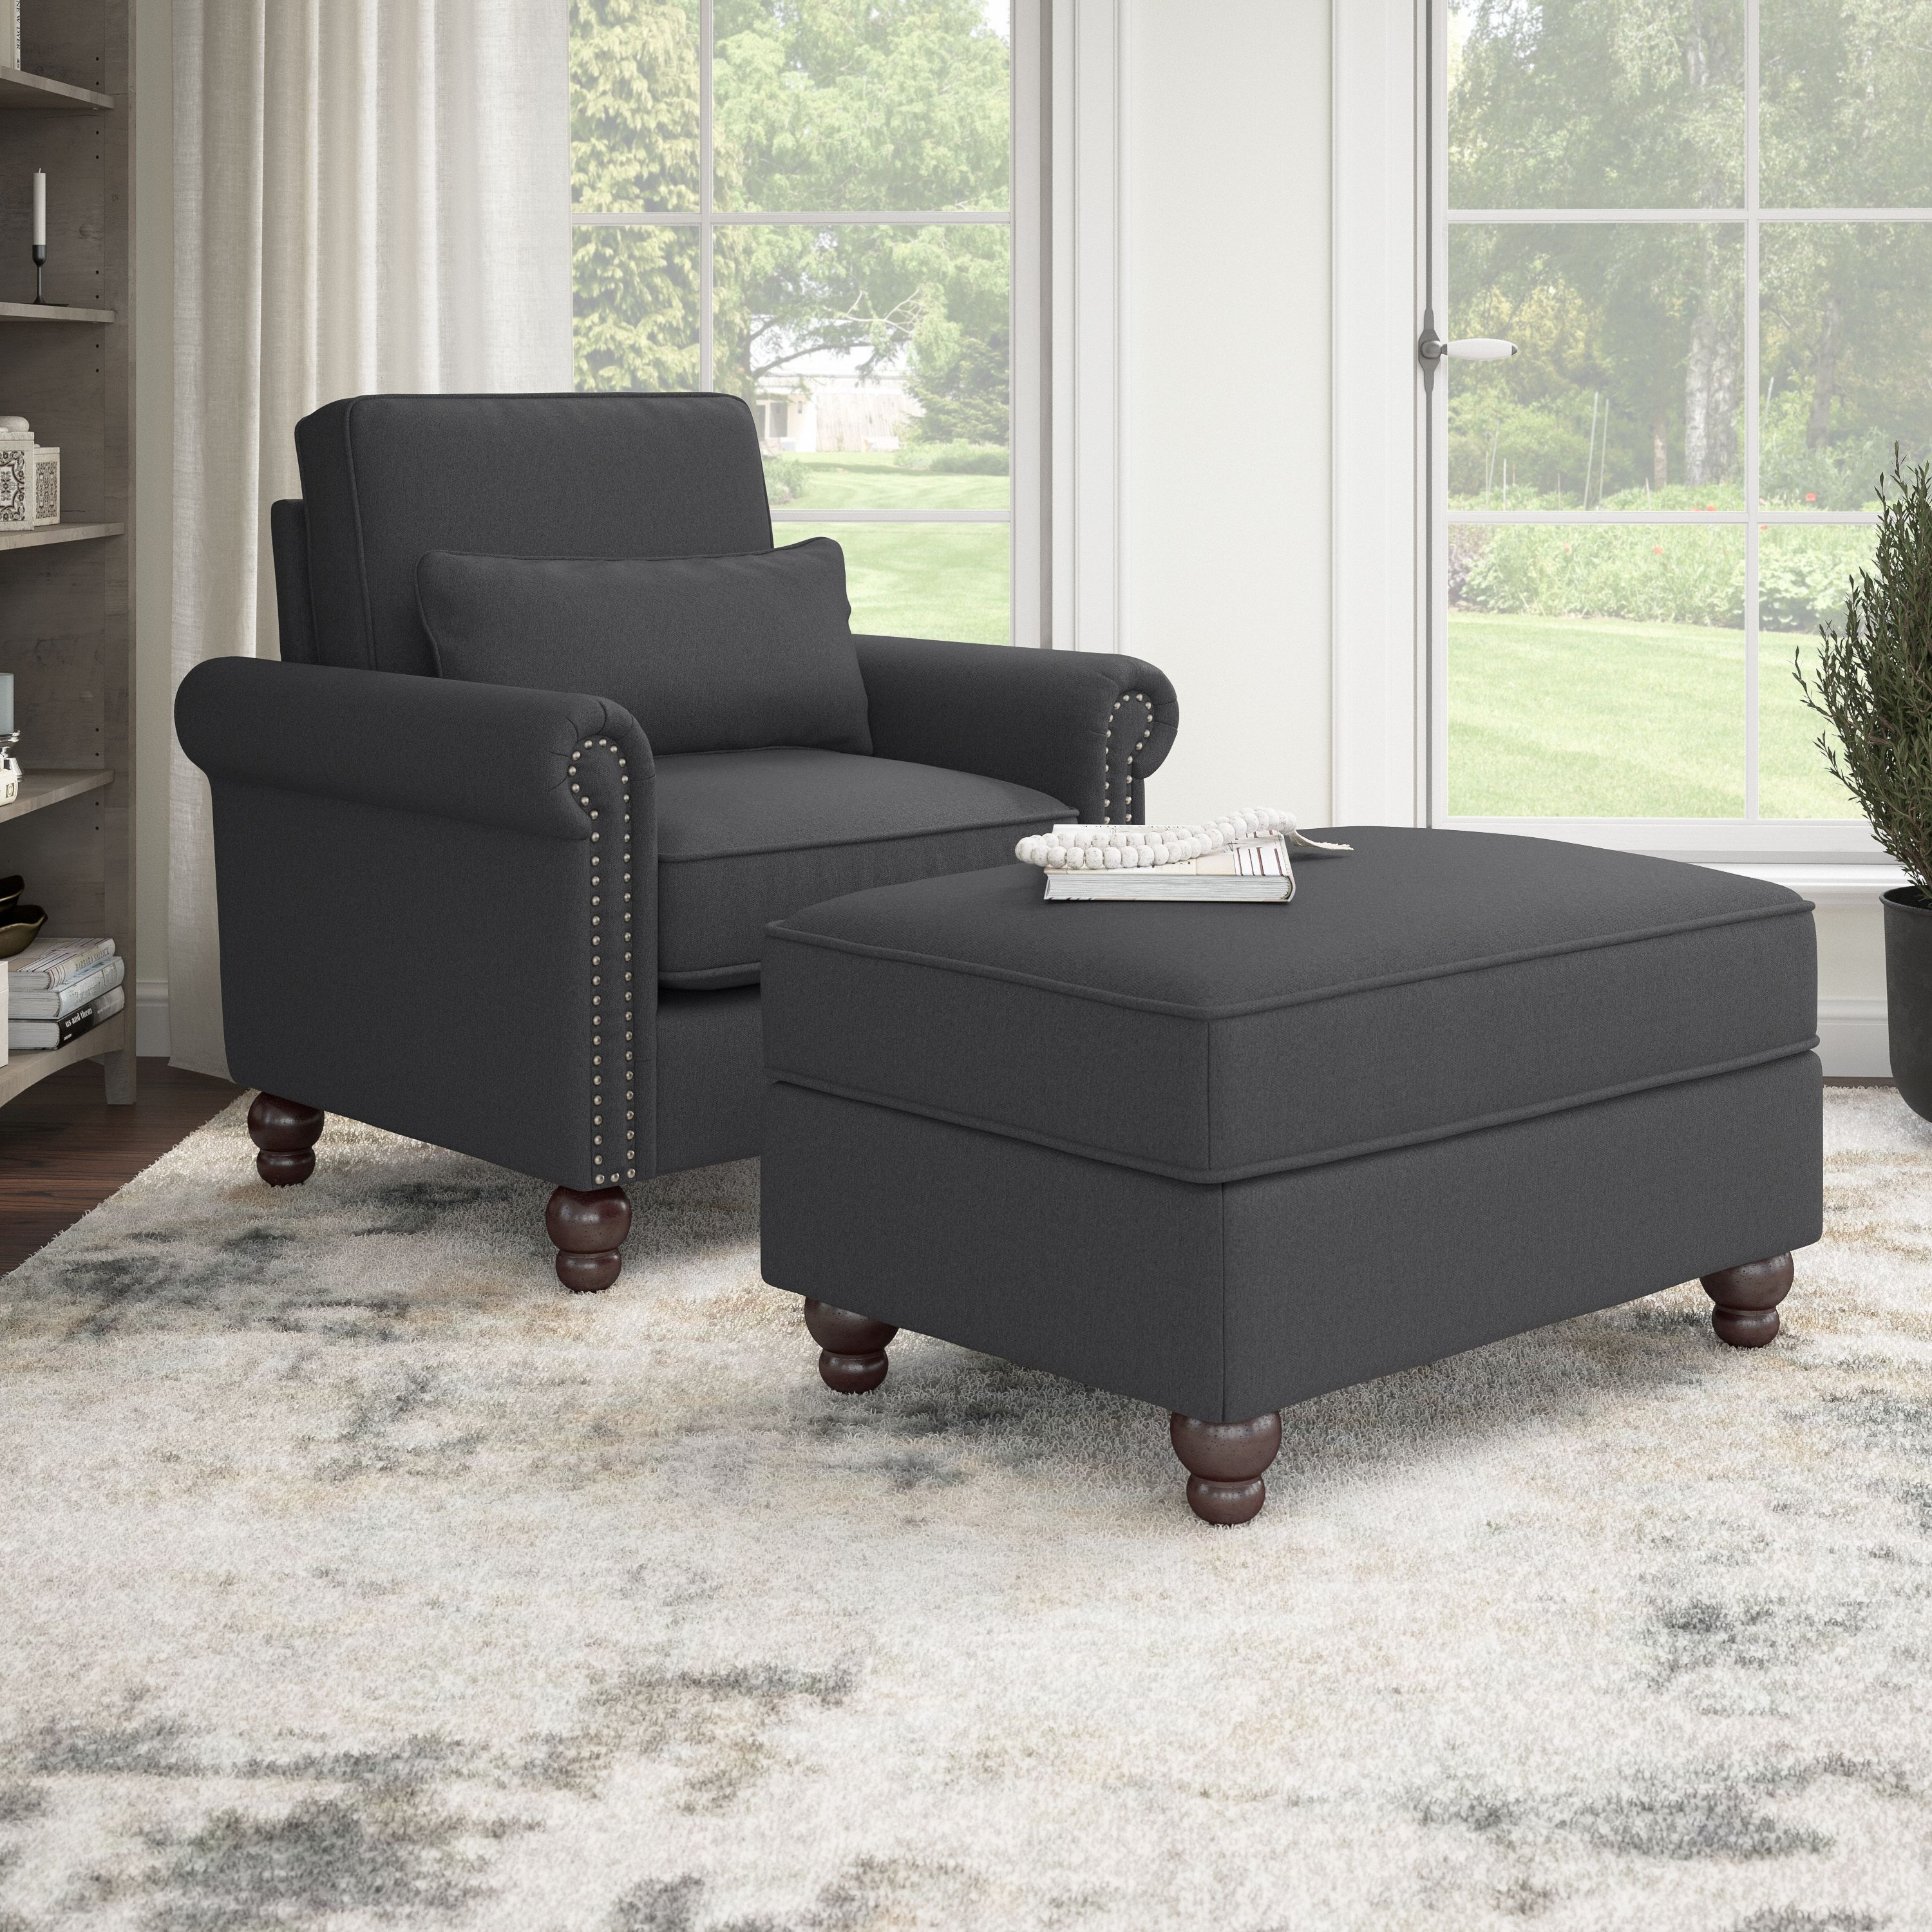 Shop Bush Furniture Coventry Accent Chair with Ottoman Set 01 CVN010CGH #color_charcoal gray herringbone fabr